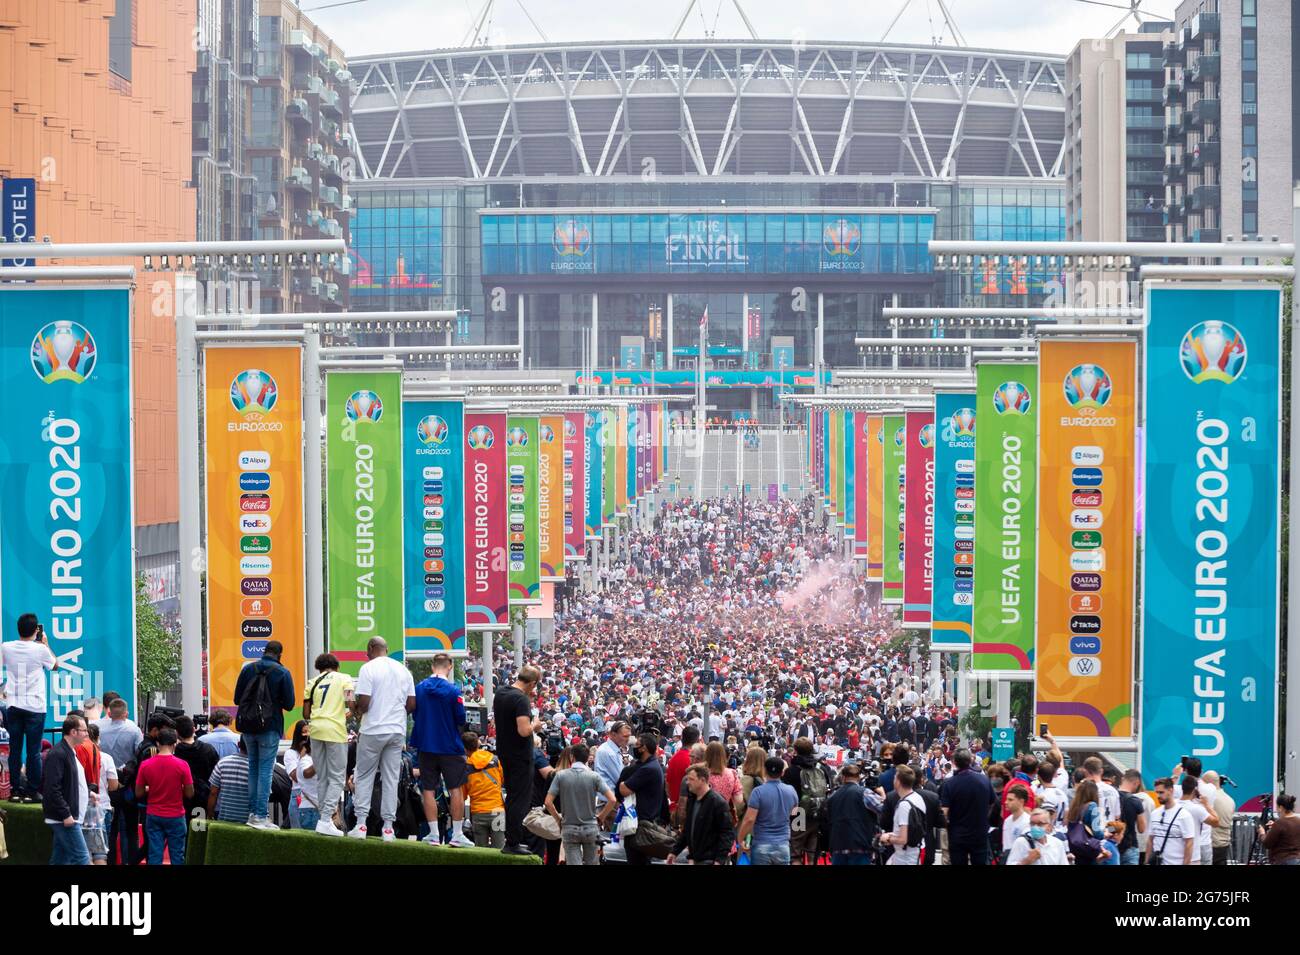 London, UK. 11th July, 2021. England fans outside Wembley Stadium ahead of the final of Euro 2020 between Italy and England. It is the first major final that England will have played in since winning the World Cup in 1966 and Italy remain unbeaten in their last 33 matches. Credit: Stephen Chung/Alamy Live News Stock Photo